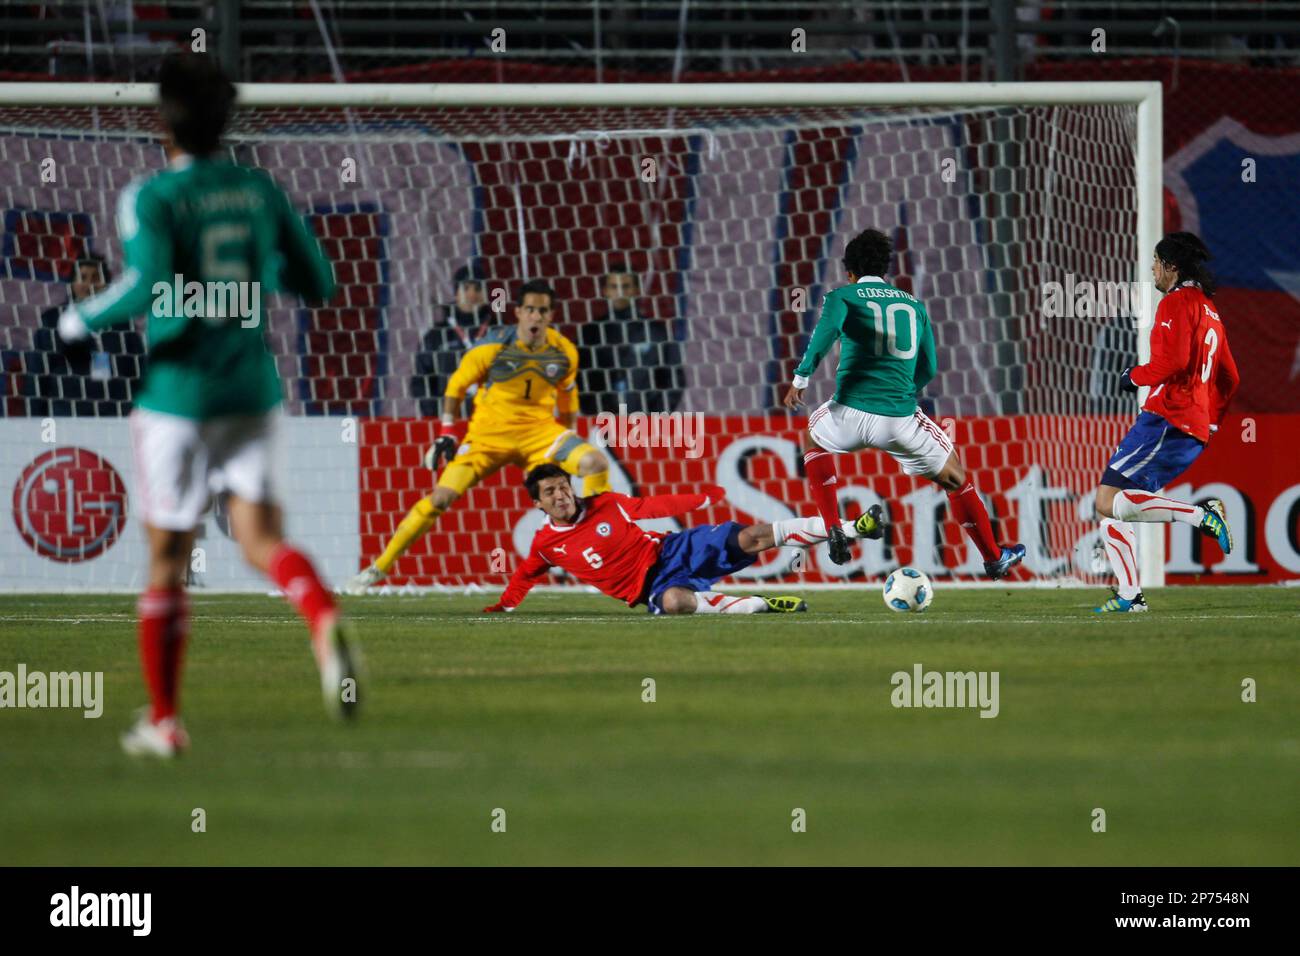 Mexico's Giovani Dos Santos, second from right, tries to score against Chile's goalkeeper Claudio Bravo, center, as teammate Pablo Contreras joins in the defense during a Copa America Group C soccer match in San Juan, Argentina, Monday, July 4, 2011. (AP Photo/Roberto Candia) Stock Photo